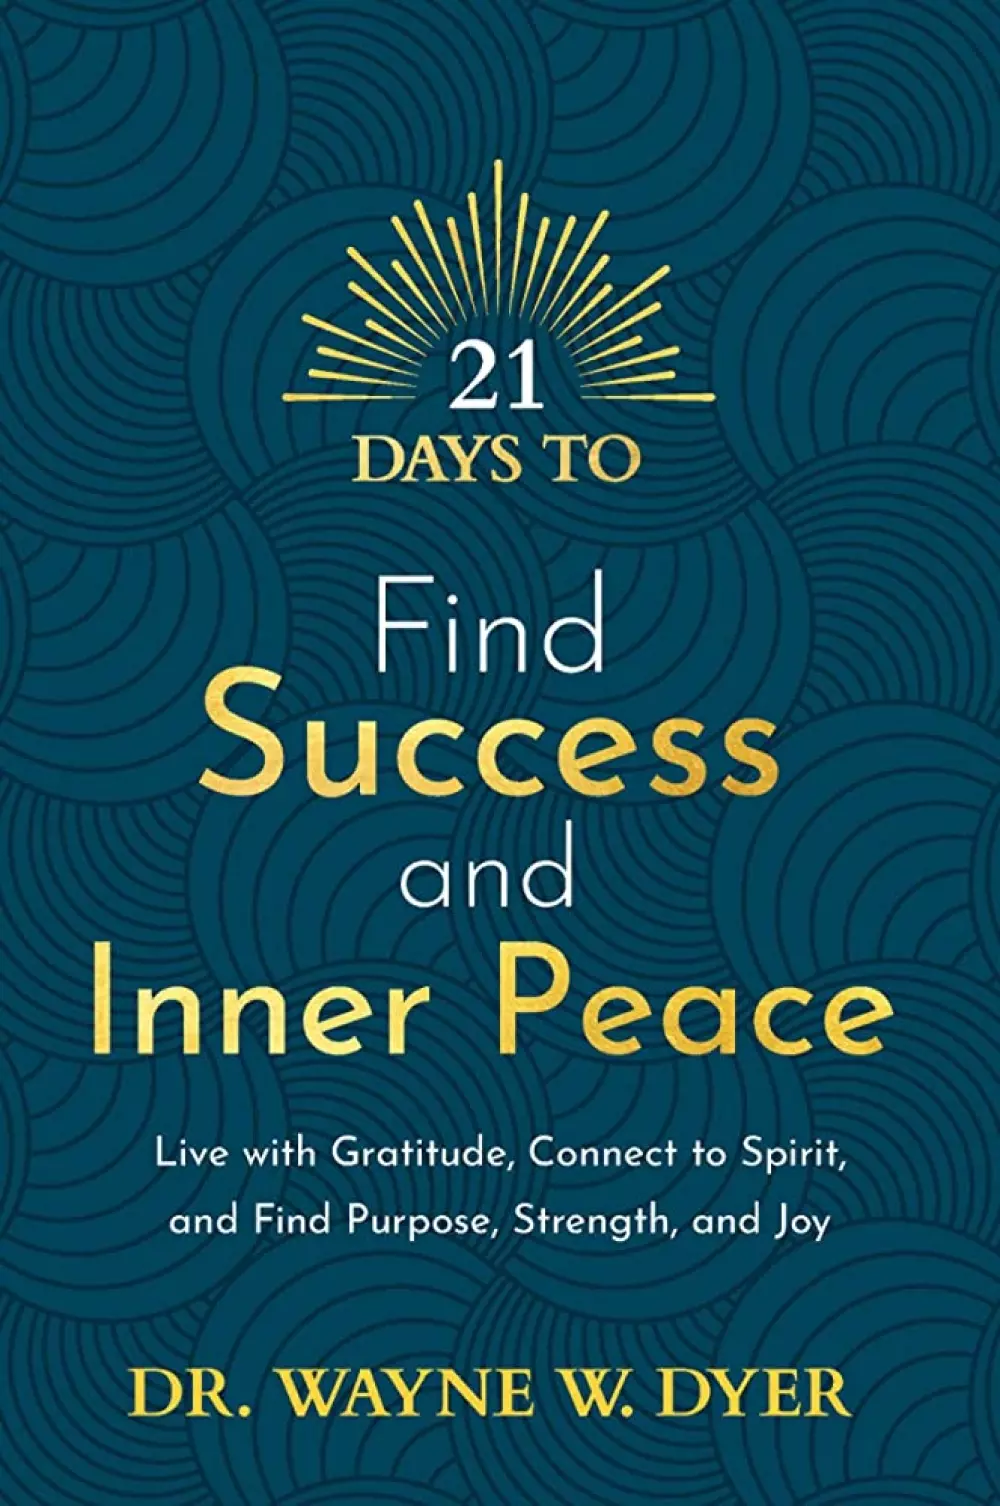 21 Days to Find Success, Bøker, Intuisjon & selvutvikling, Discover your true life purpose, open your mind and your heart to opportunity and potential, and lead a happy, successful life.